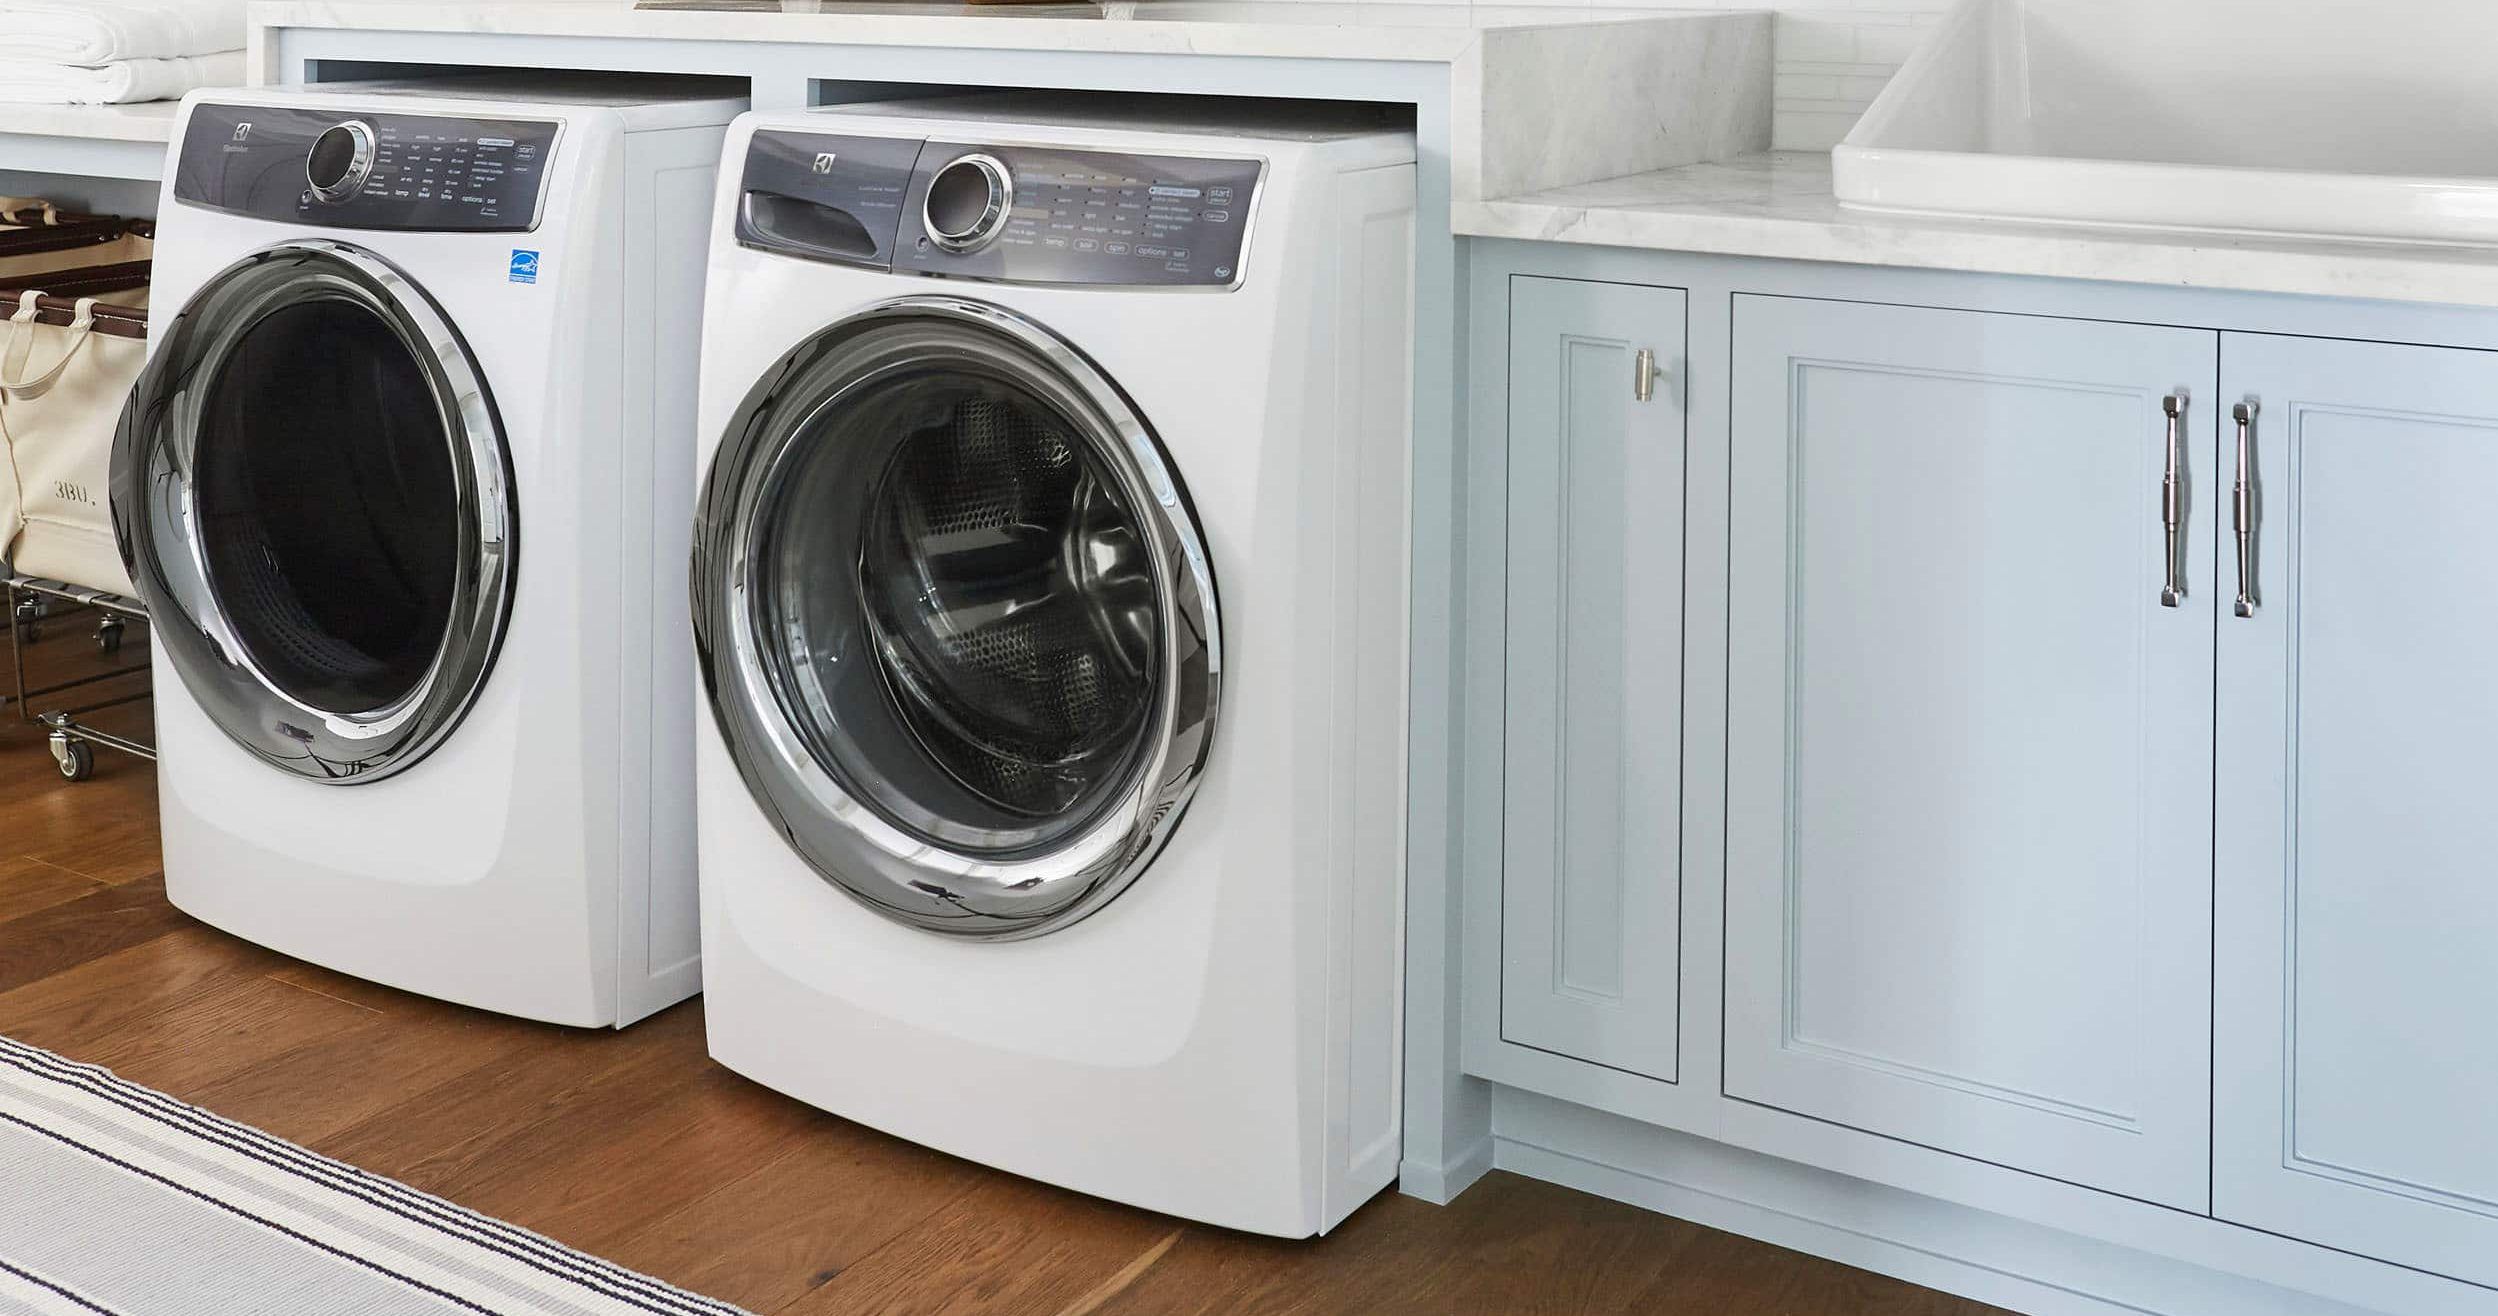 Top-Loading or Front-Loading Washing Machines: Which Is Best?